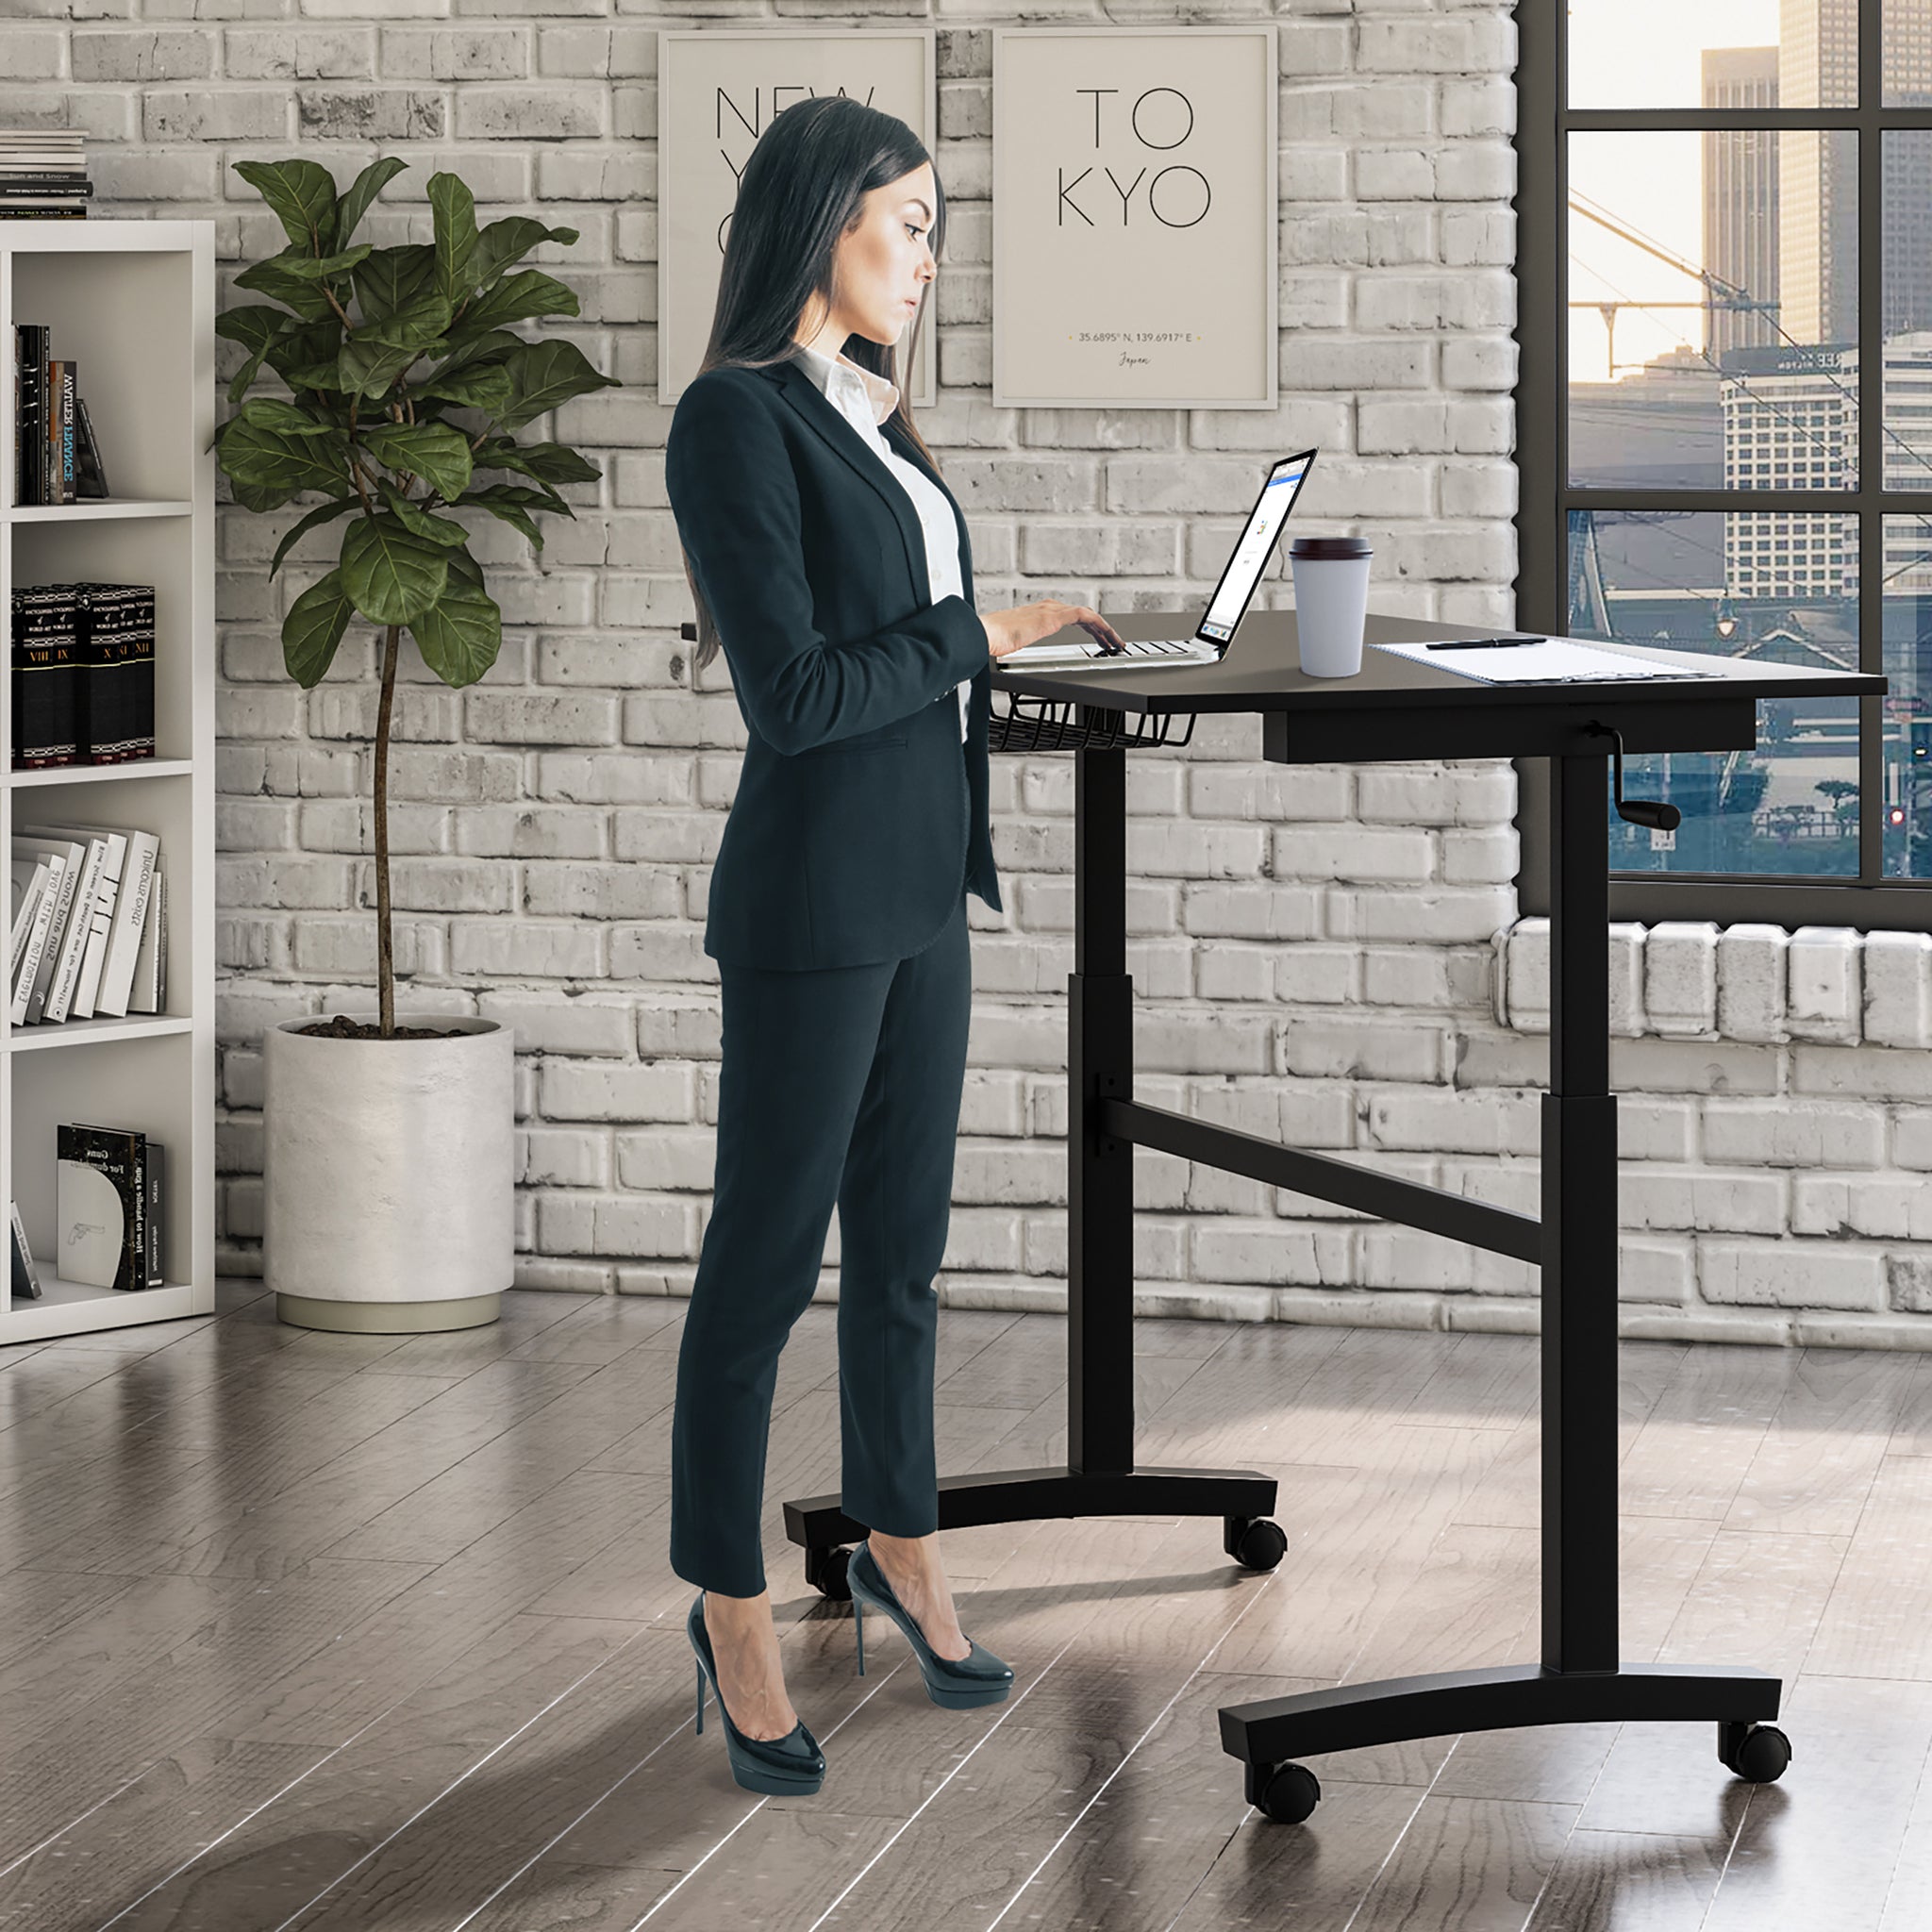 Sit Stand Desk with Casters Black Height Adjustable black-metal